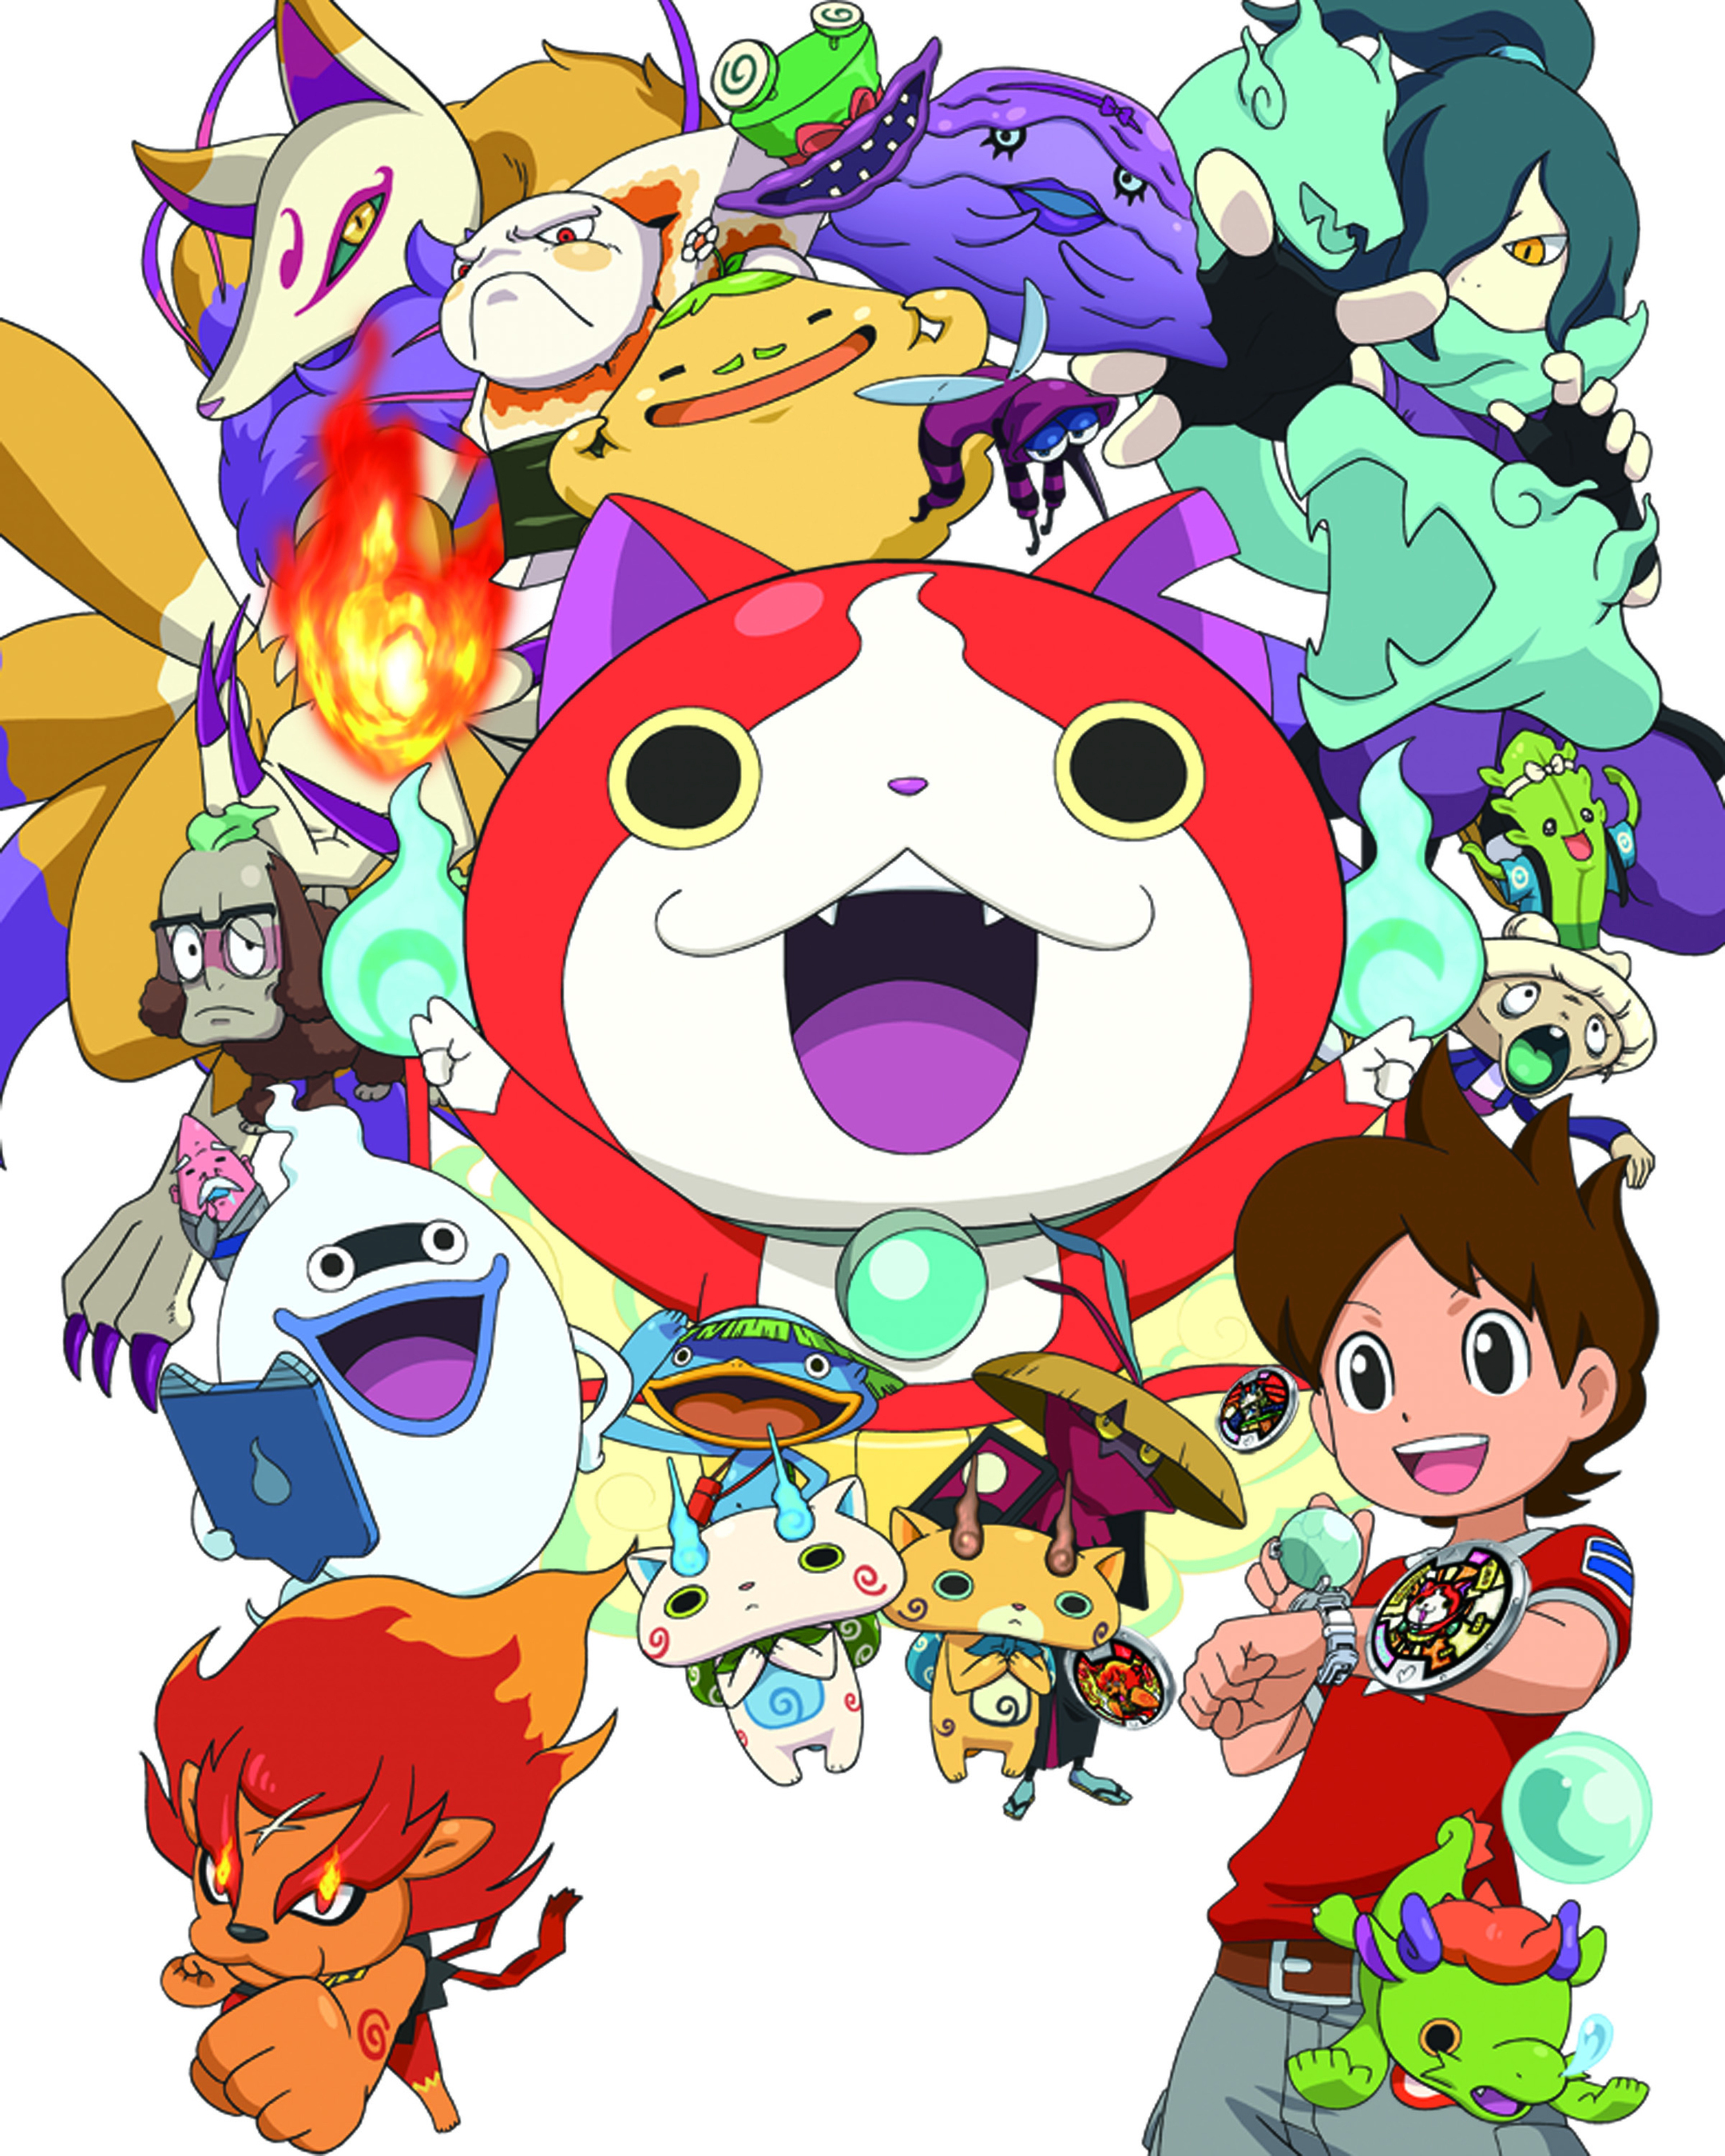 In the hugely popular Japanese comic and TV show "YO-Kai Watch," a curious ten-year-old boy frees Whisper, a ghost-butler yo-kai, from 190 years of imprisonment. In gratitude, Whisper pledges to protect the boy from supernatural challenges, and gifts him with a magical tool, which allows the youth to see other yo-kai. The young boy and Whisper, together with another yo-kai spirit, Jibanyan the twin-tailed cat, engage with some of the yo-kai spirits, in this ongoing comedic adventure. (PRNewsFoto/Dentsu Entertainment USA, Inc.) (PRNewsFoto/Dentsu Entertainment USA, Inc.)